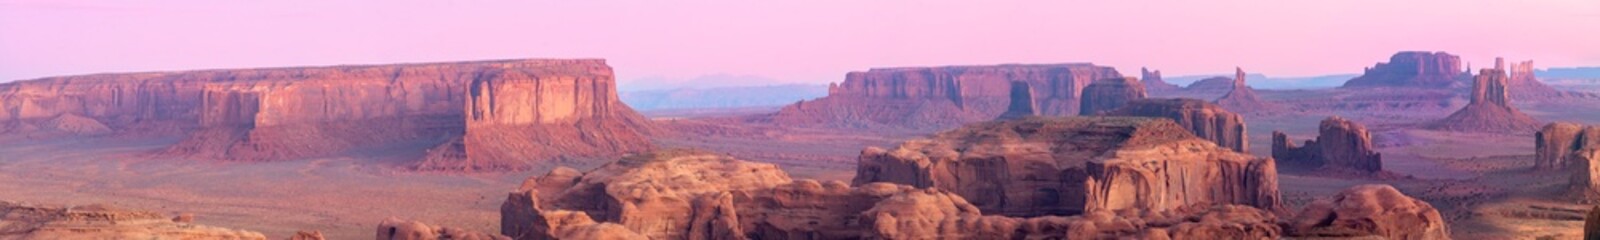 Sunrise at Monument Valley as viewed from Hunt's Mesa, Arizona-Utah State Line in the 4 Corners...